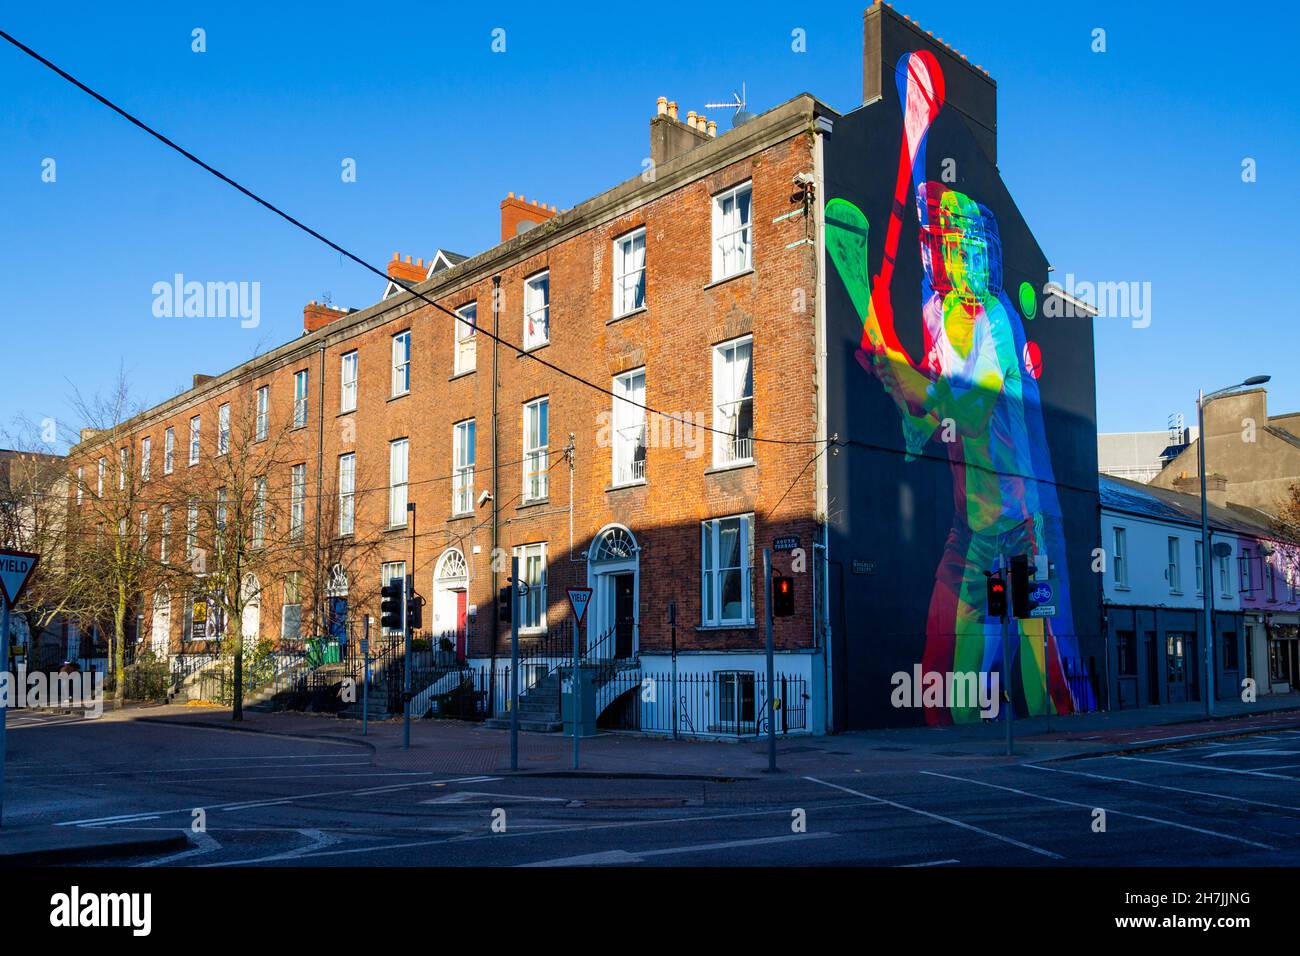 Row of terraced houses in Cork City Ireland with mural of man Hurling on gable end. Stock Photo